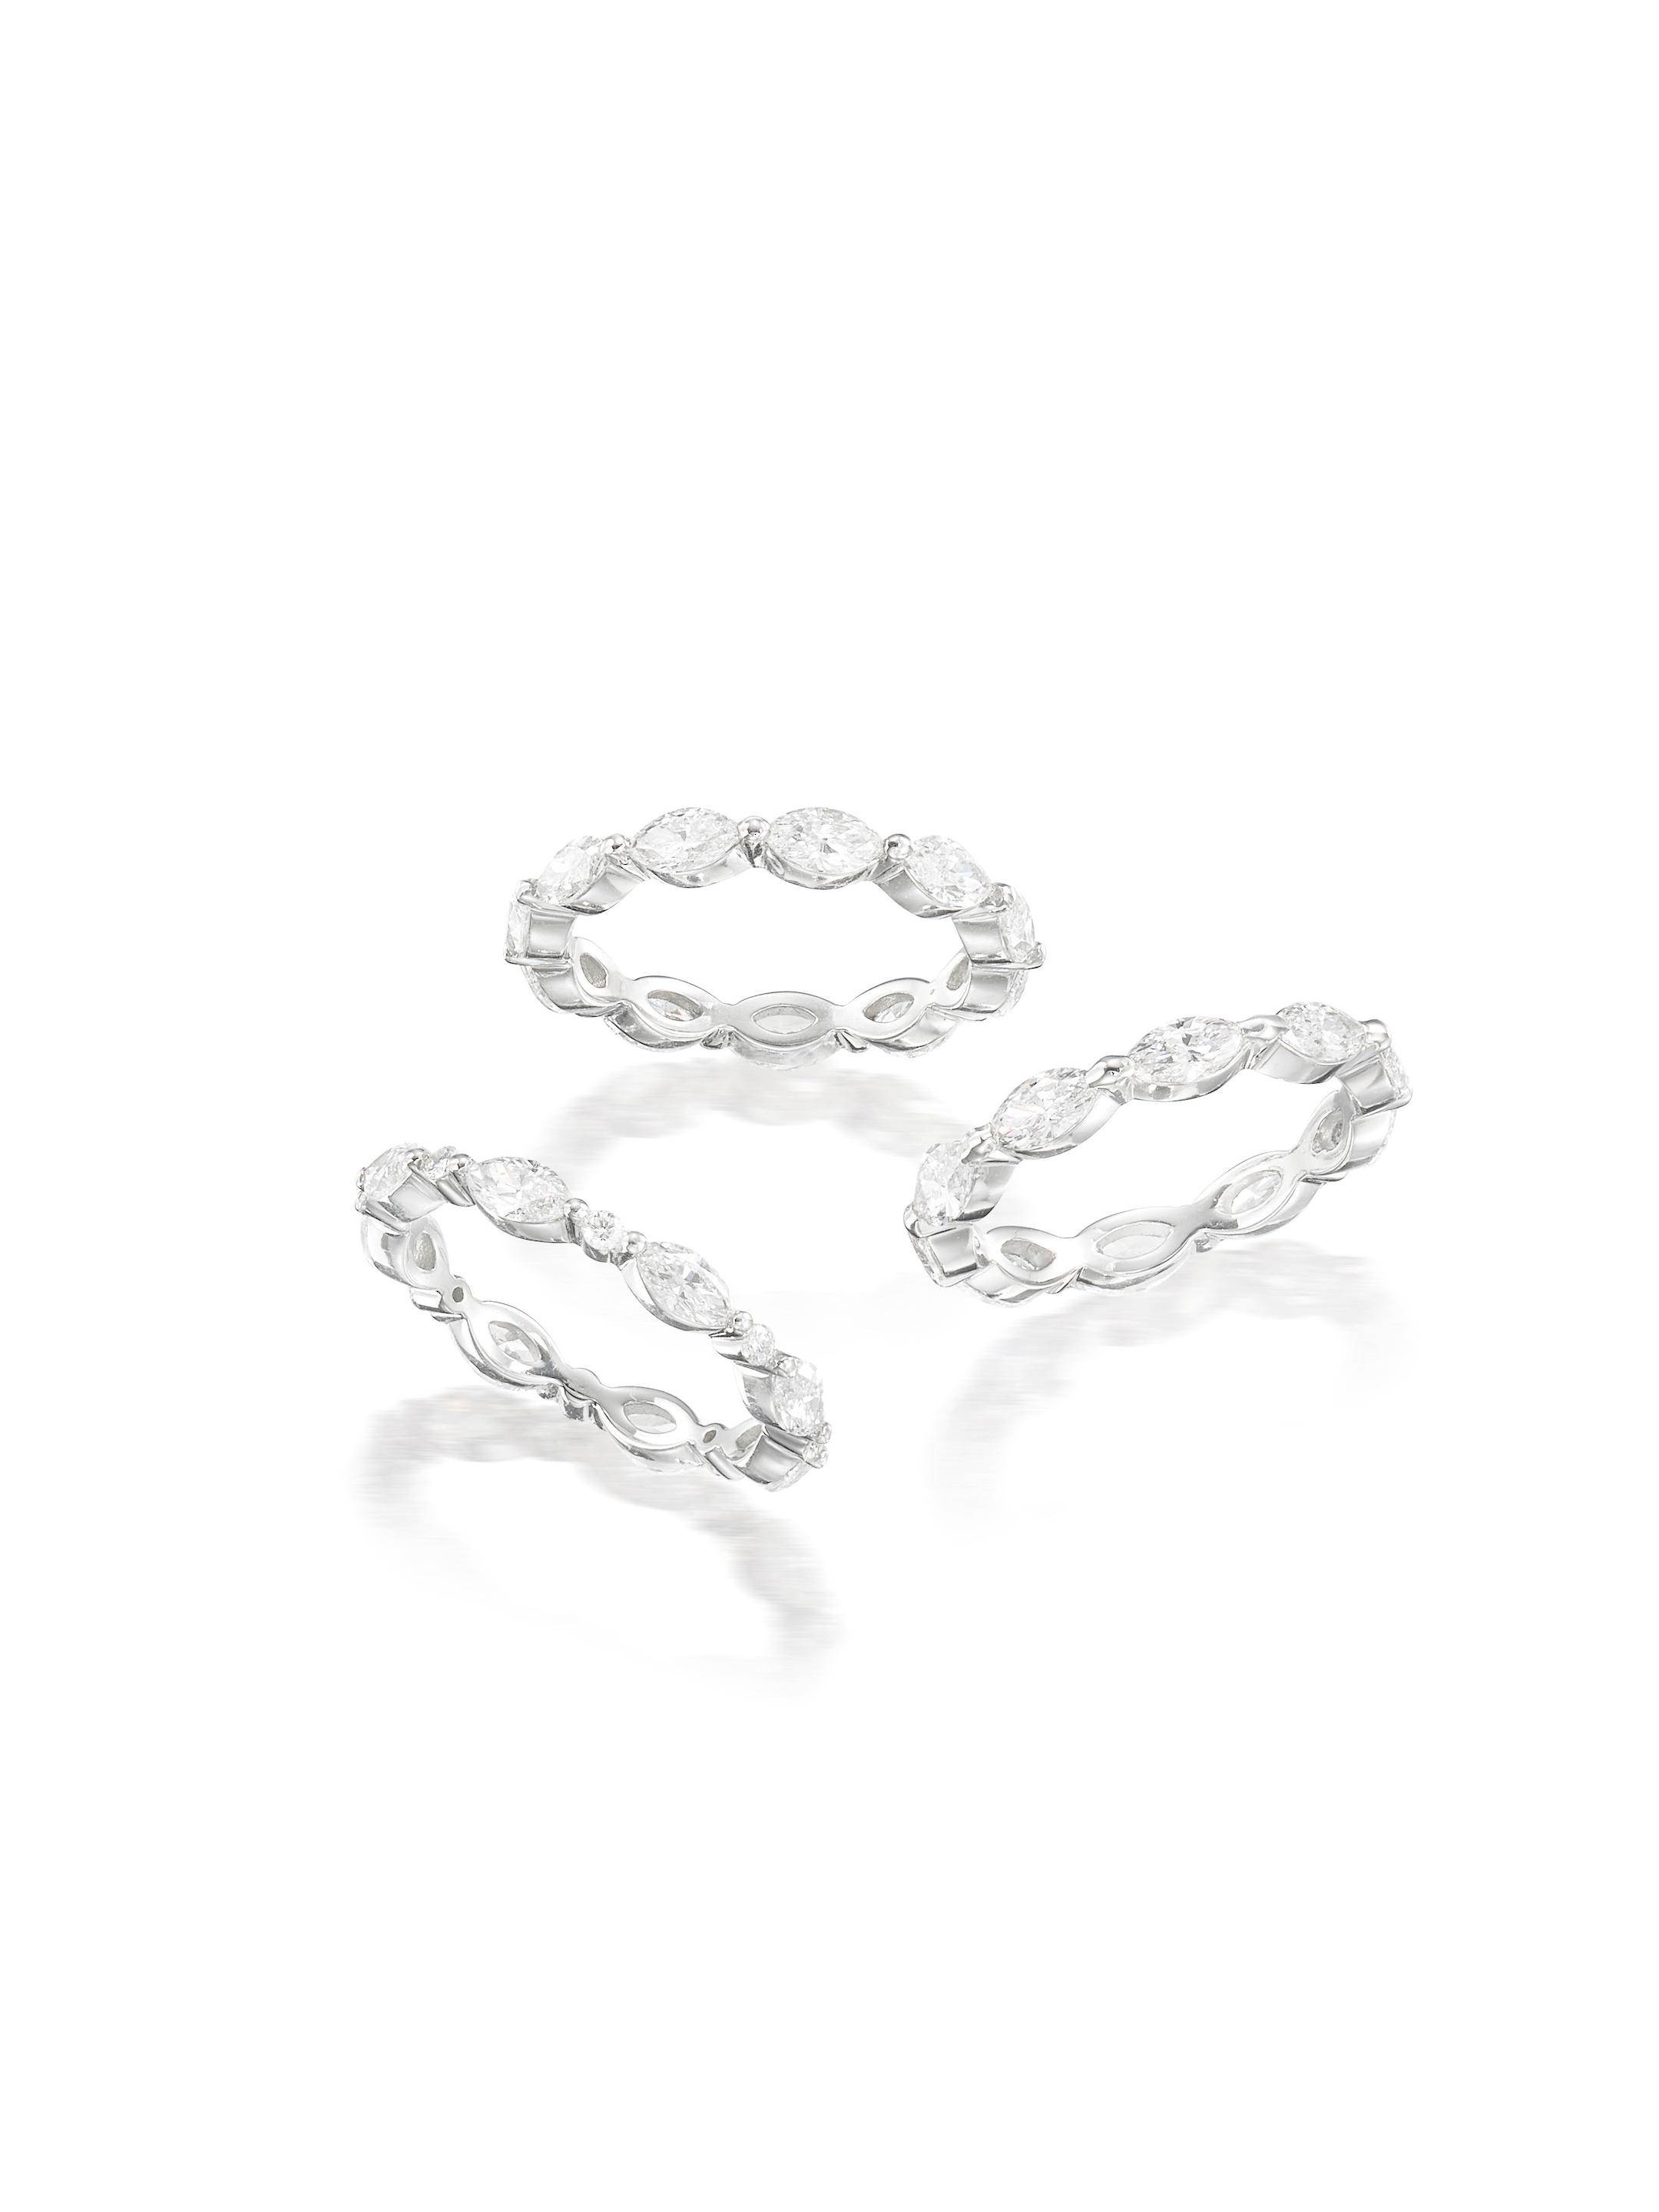 A GROUP OF DIAMOND BANDS